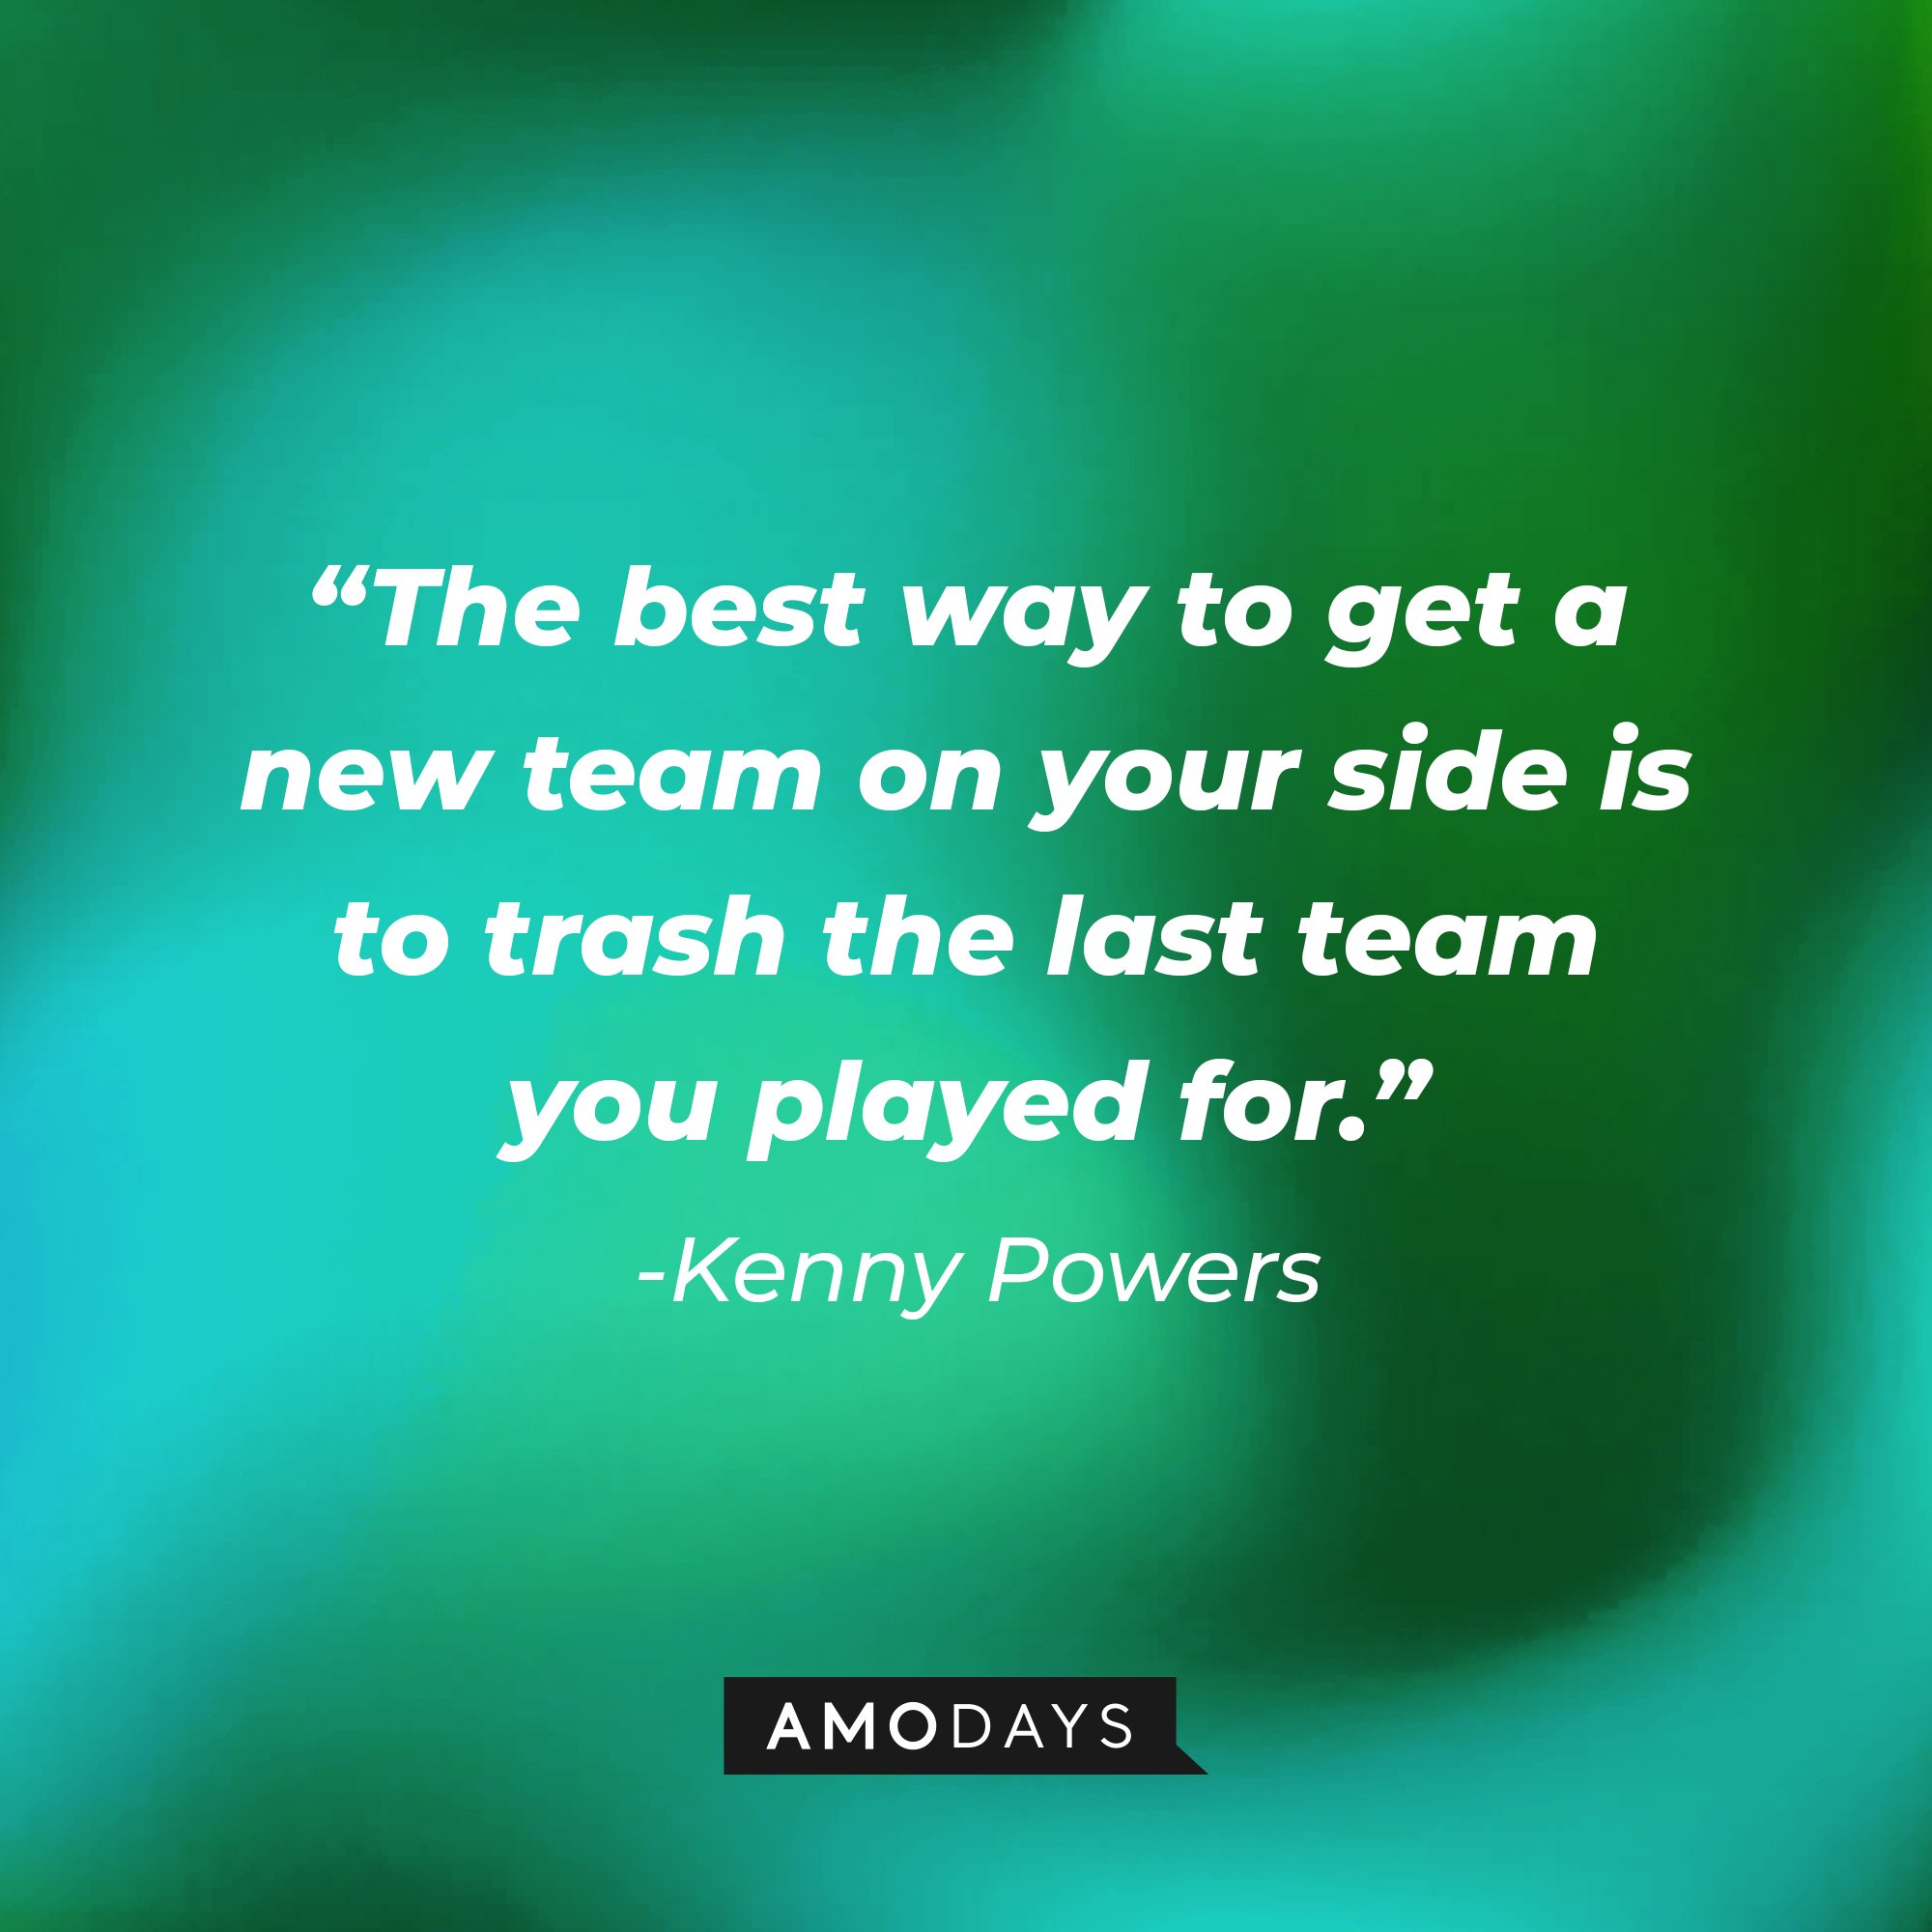 Kenny Powers' quote: “The best way to get a new team on your side is to trash the last team you played for.” | Image: AmoDays